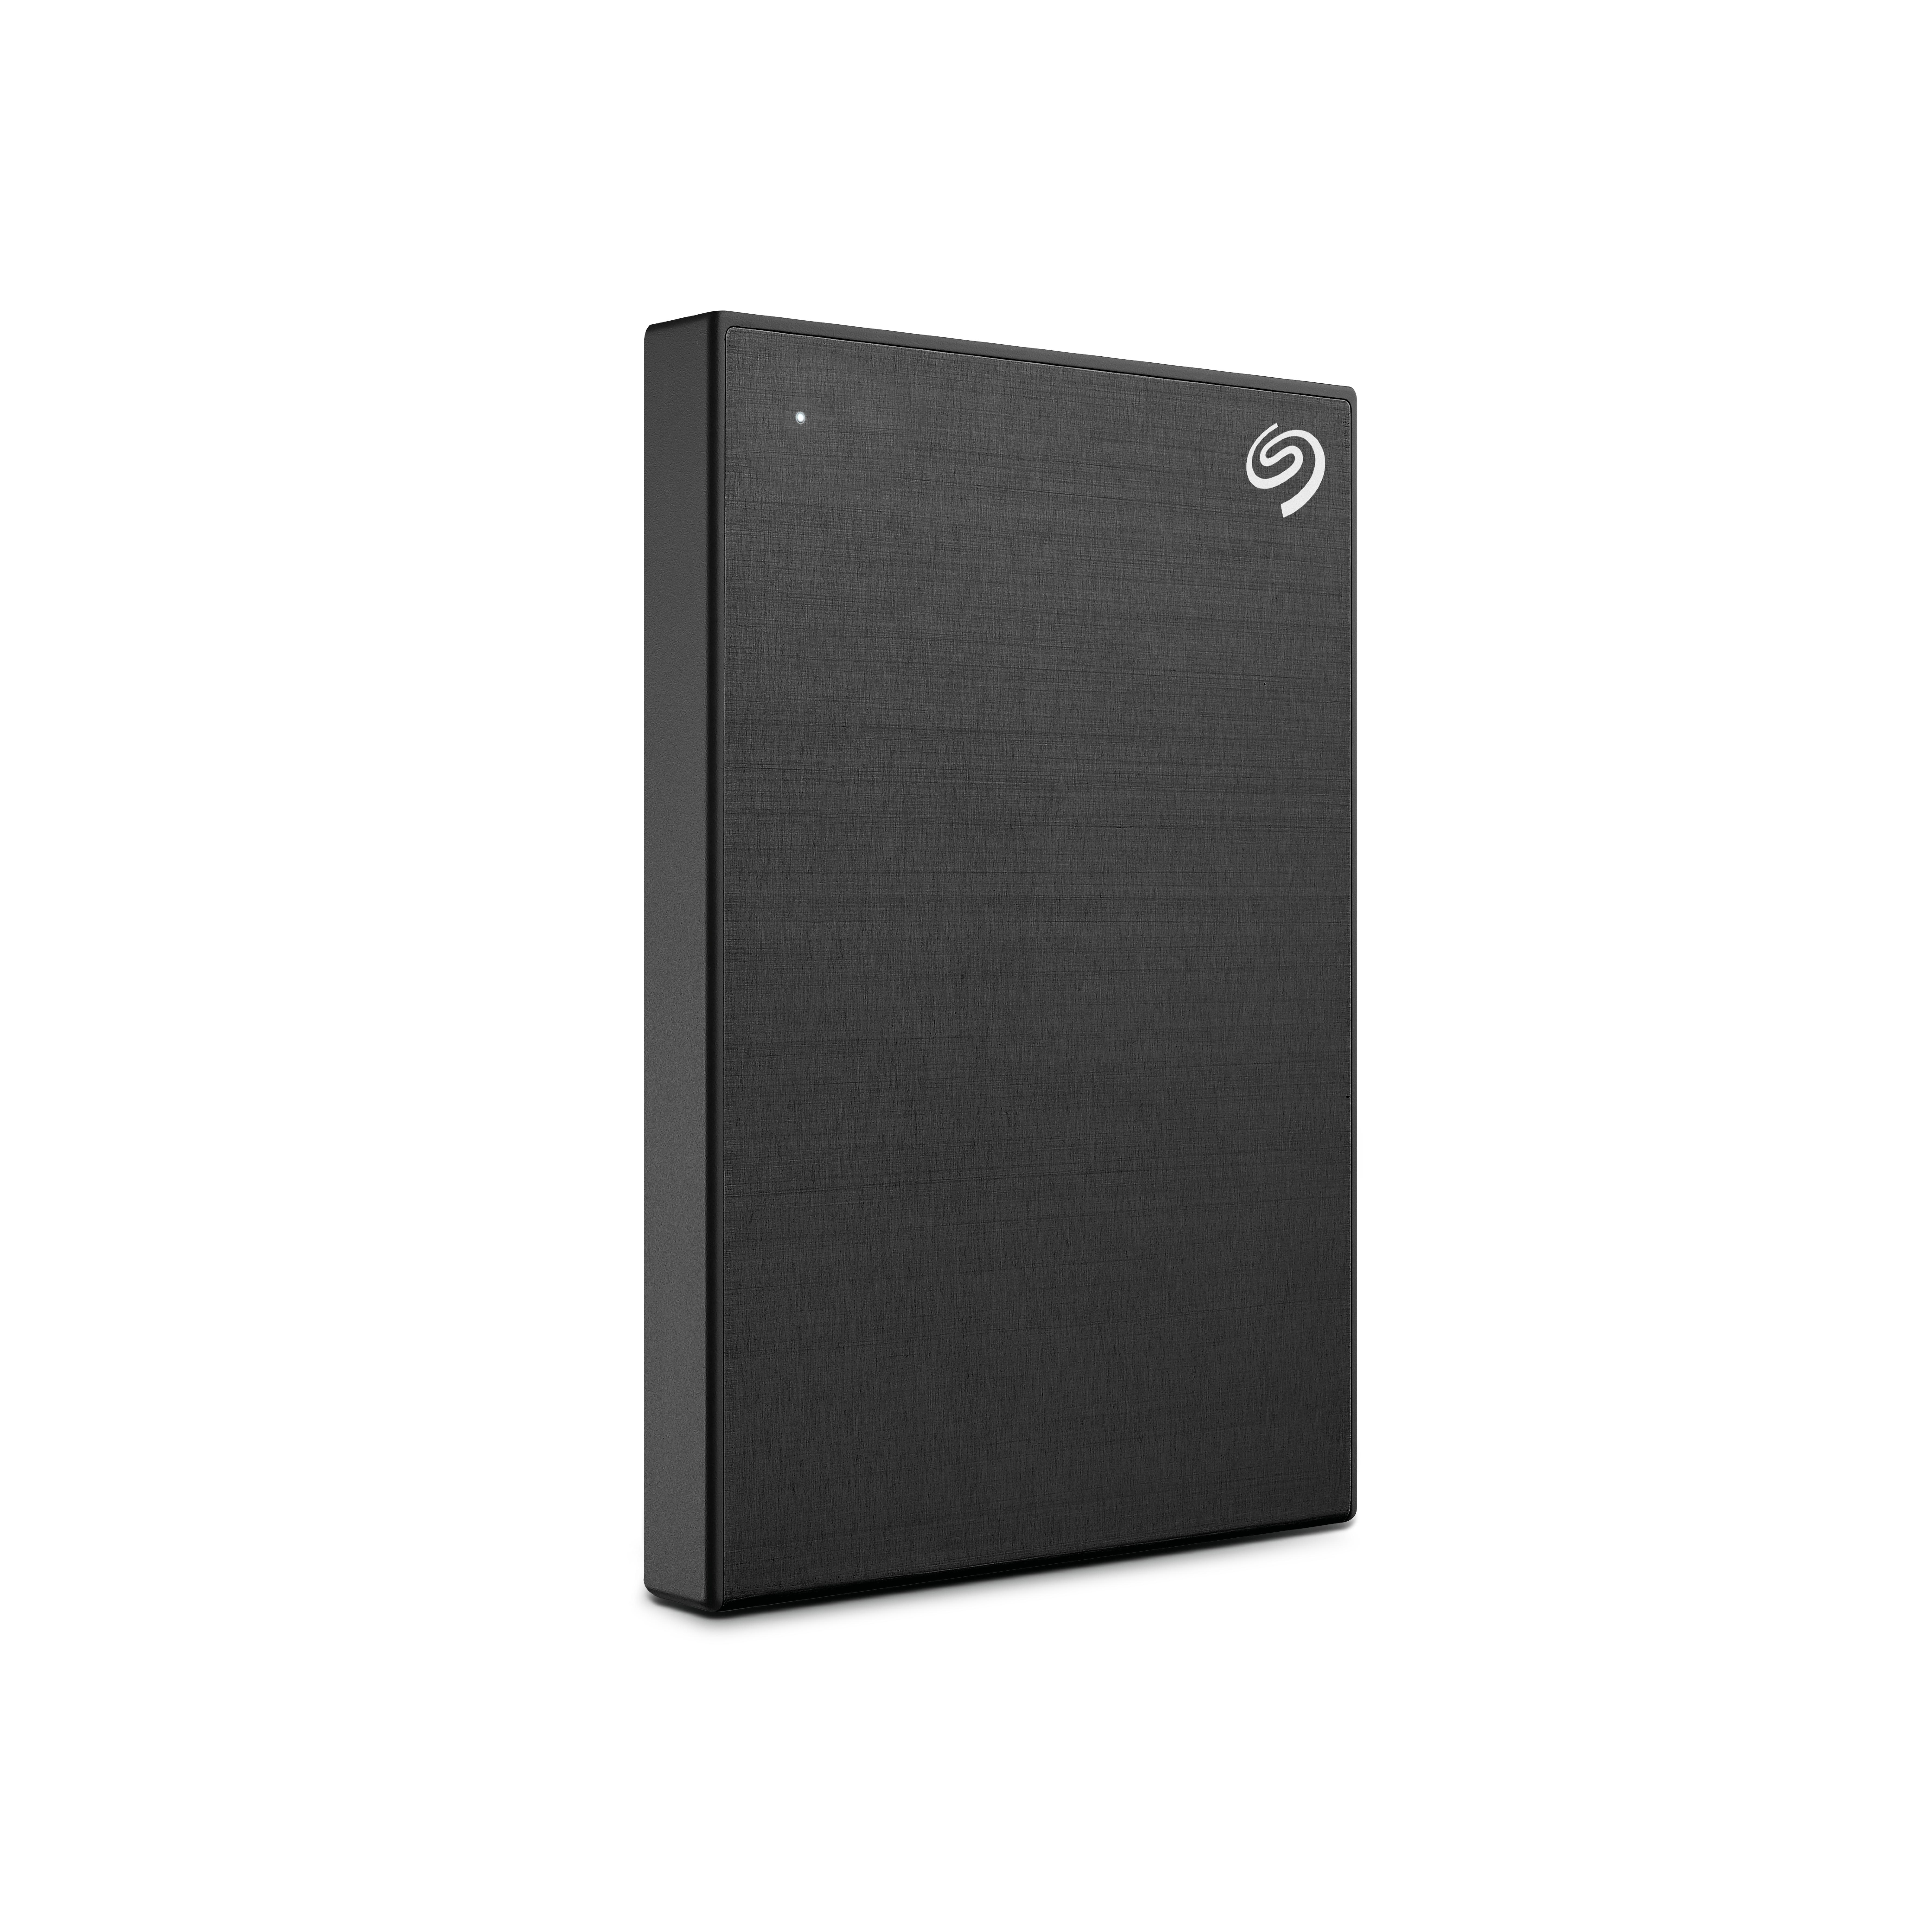 SEAGATE One Touch mobile Festplatte, 2,5 1 Schwarz TB HDD, Zoll, extern